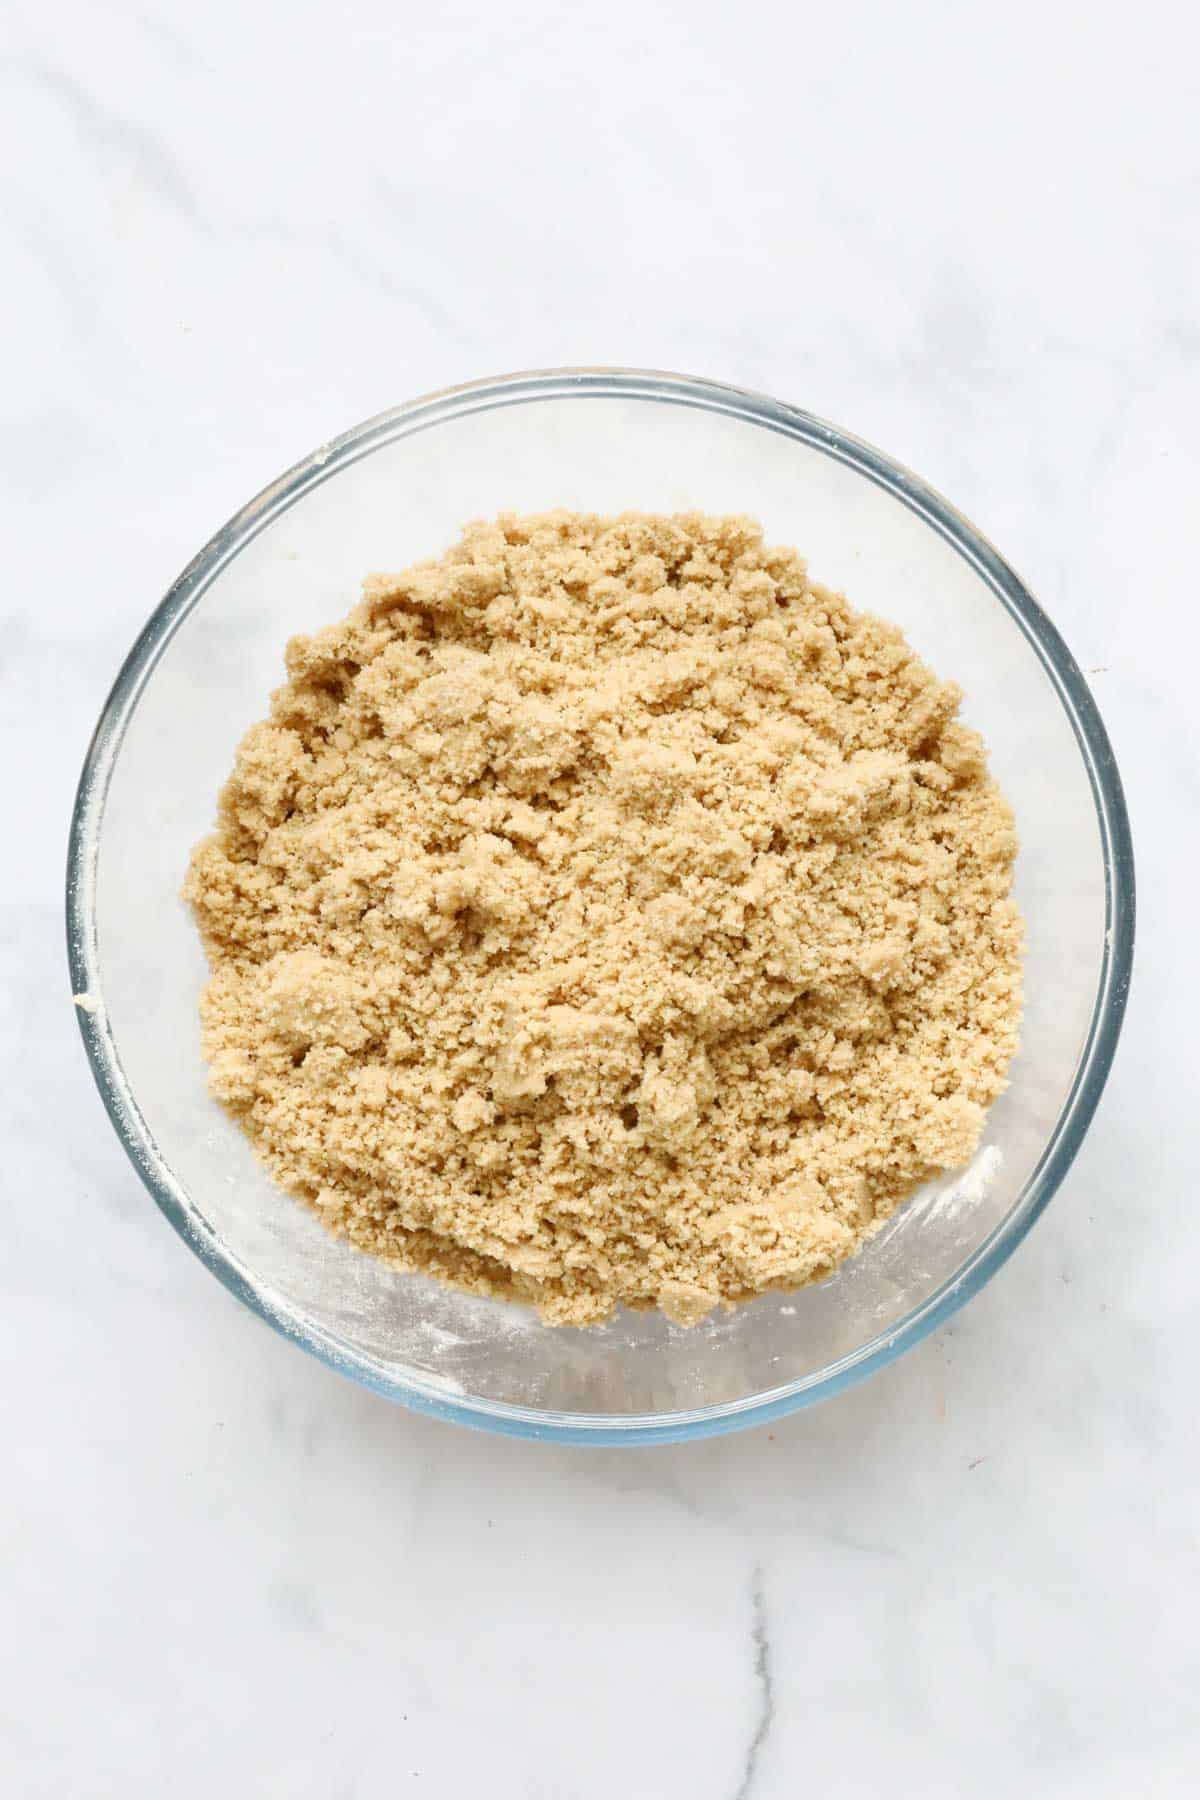 Flour, brown sugar, and almond meal rubbed into breadcrumbs with butter.